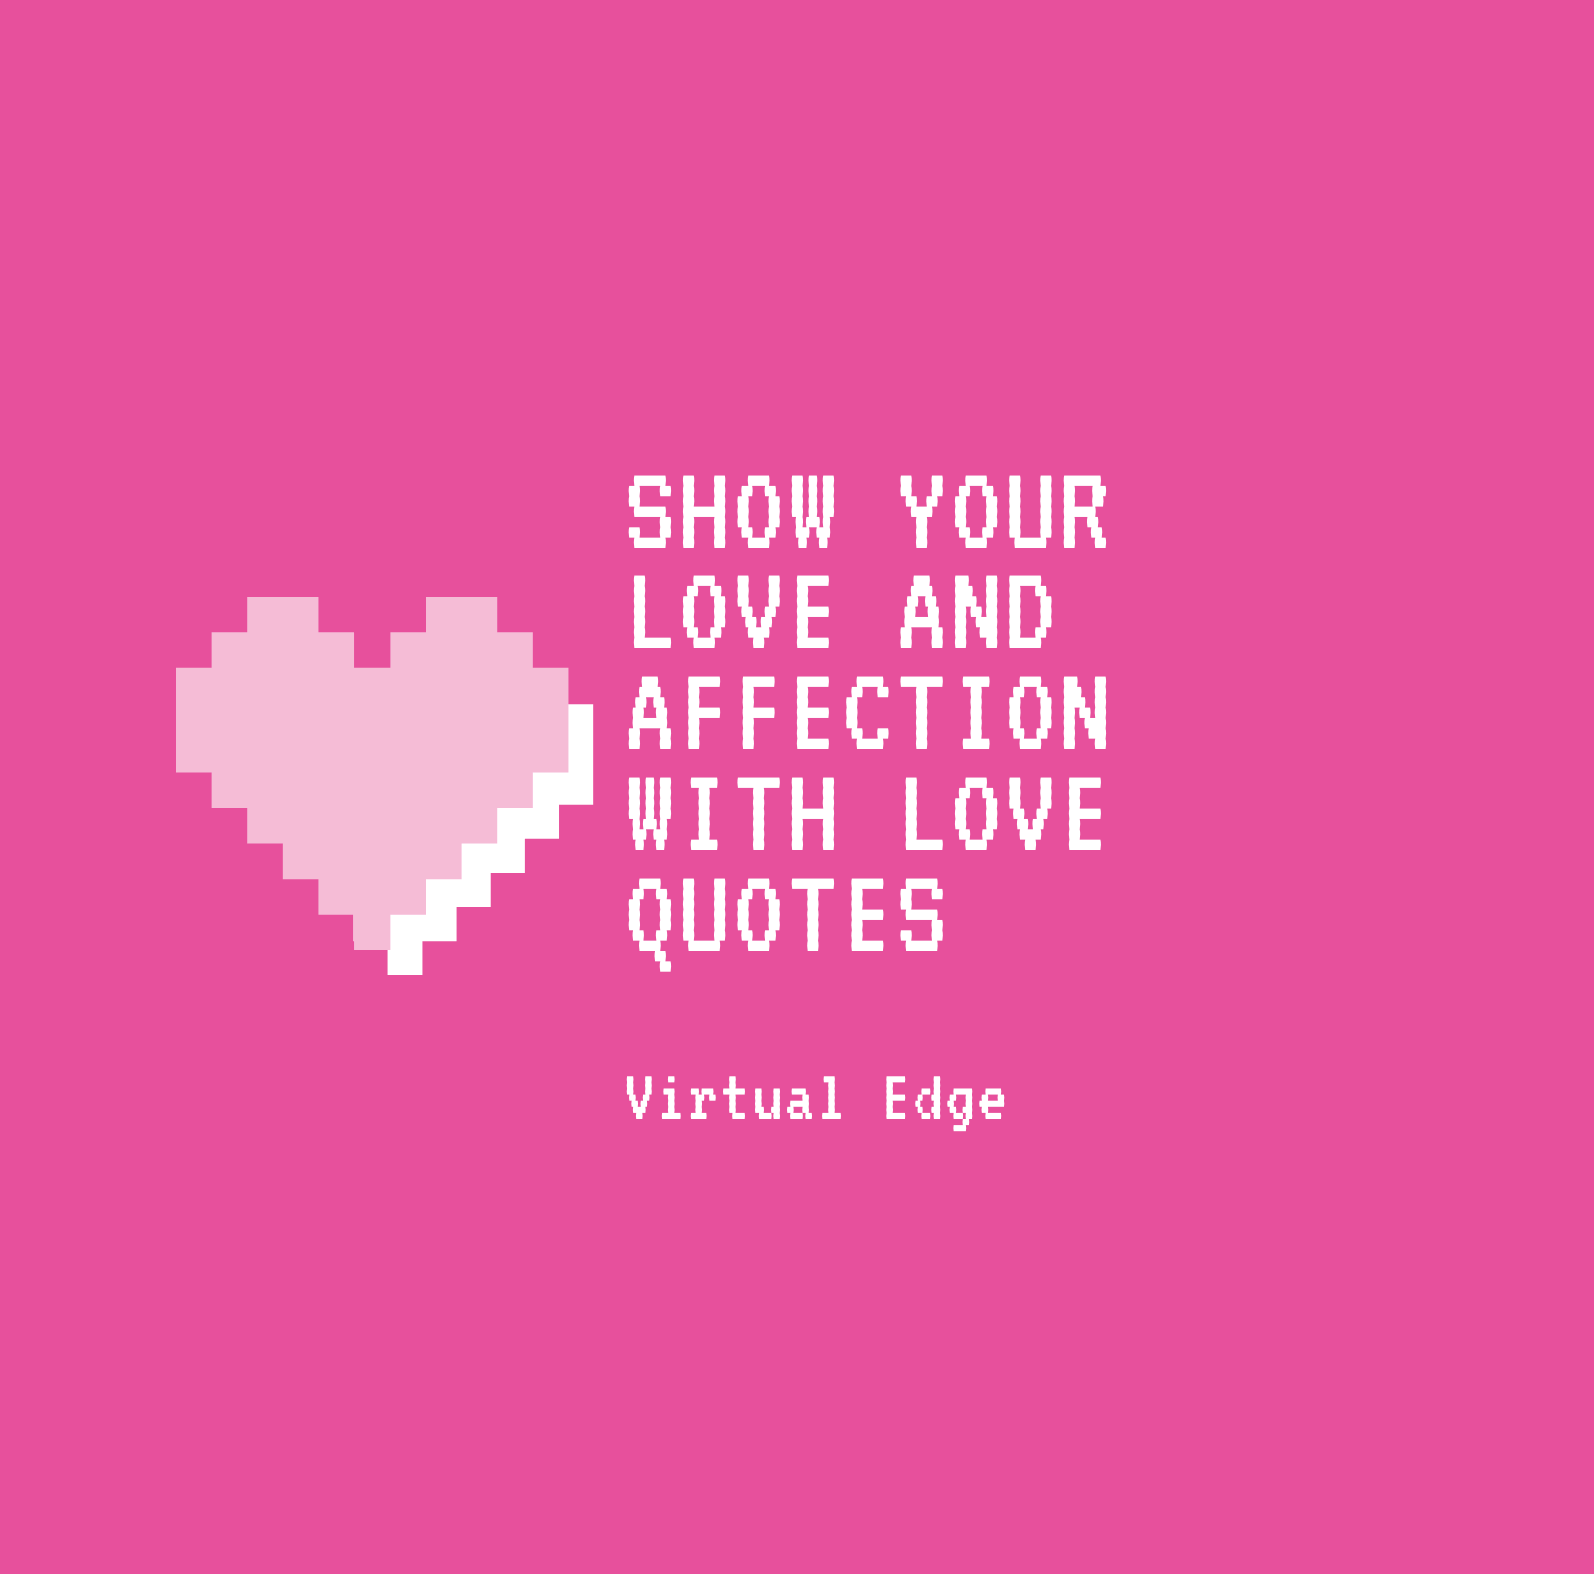 Show Your Love and Affection with Love Quotes